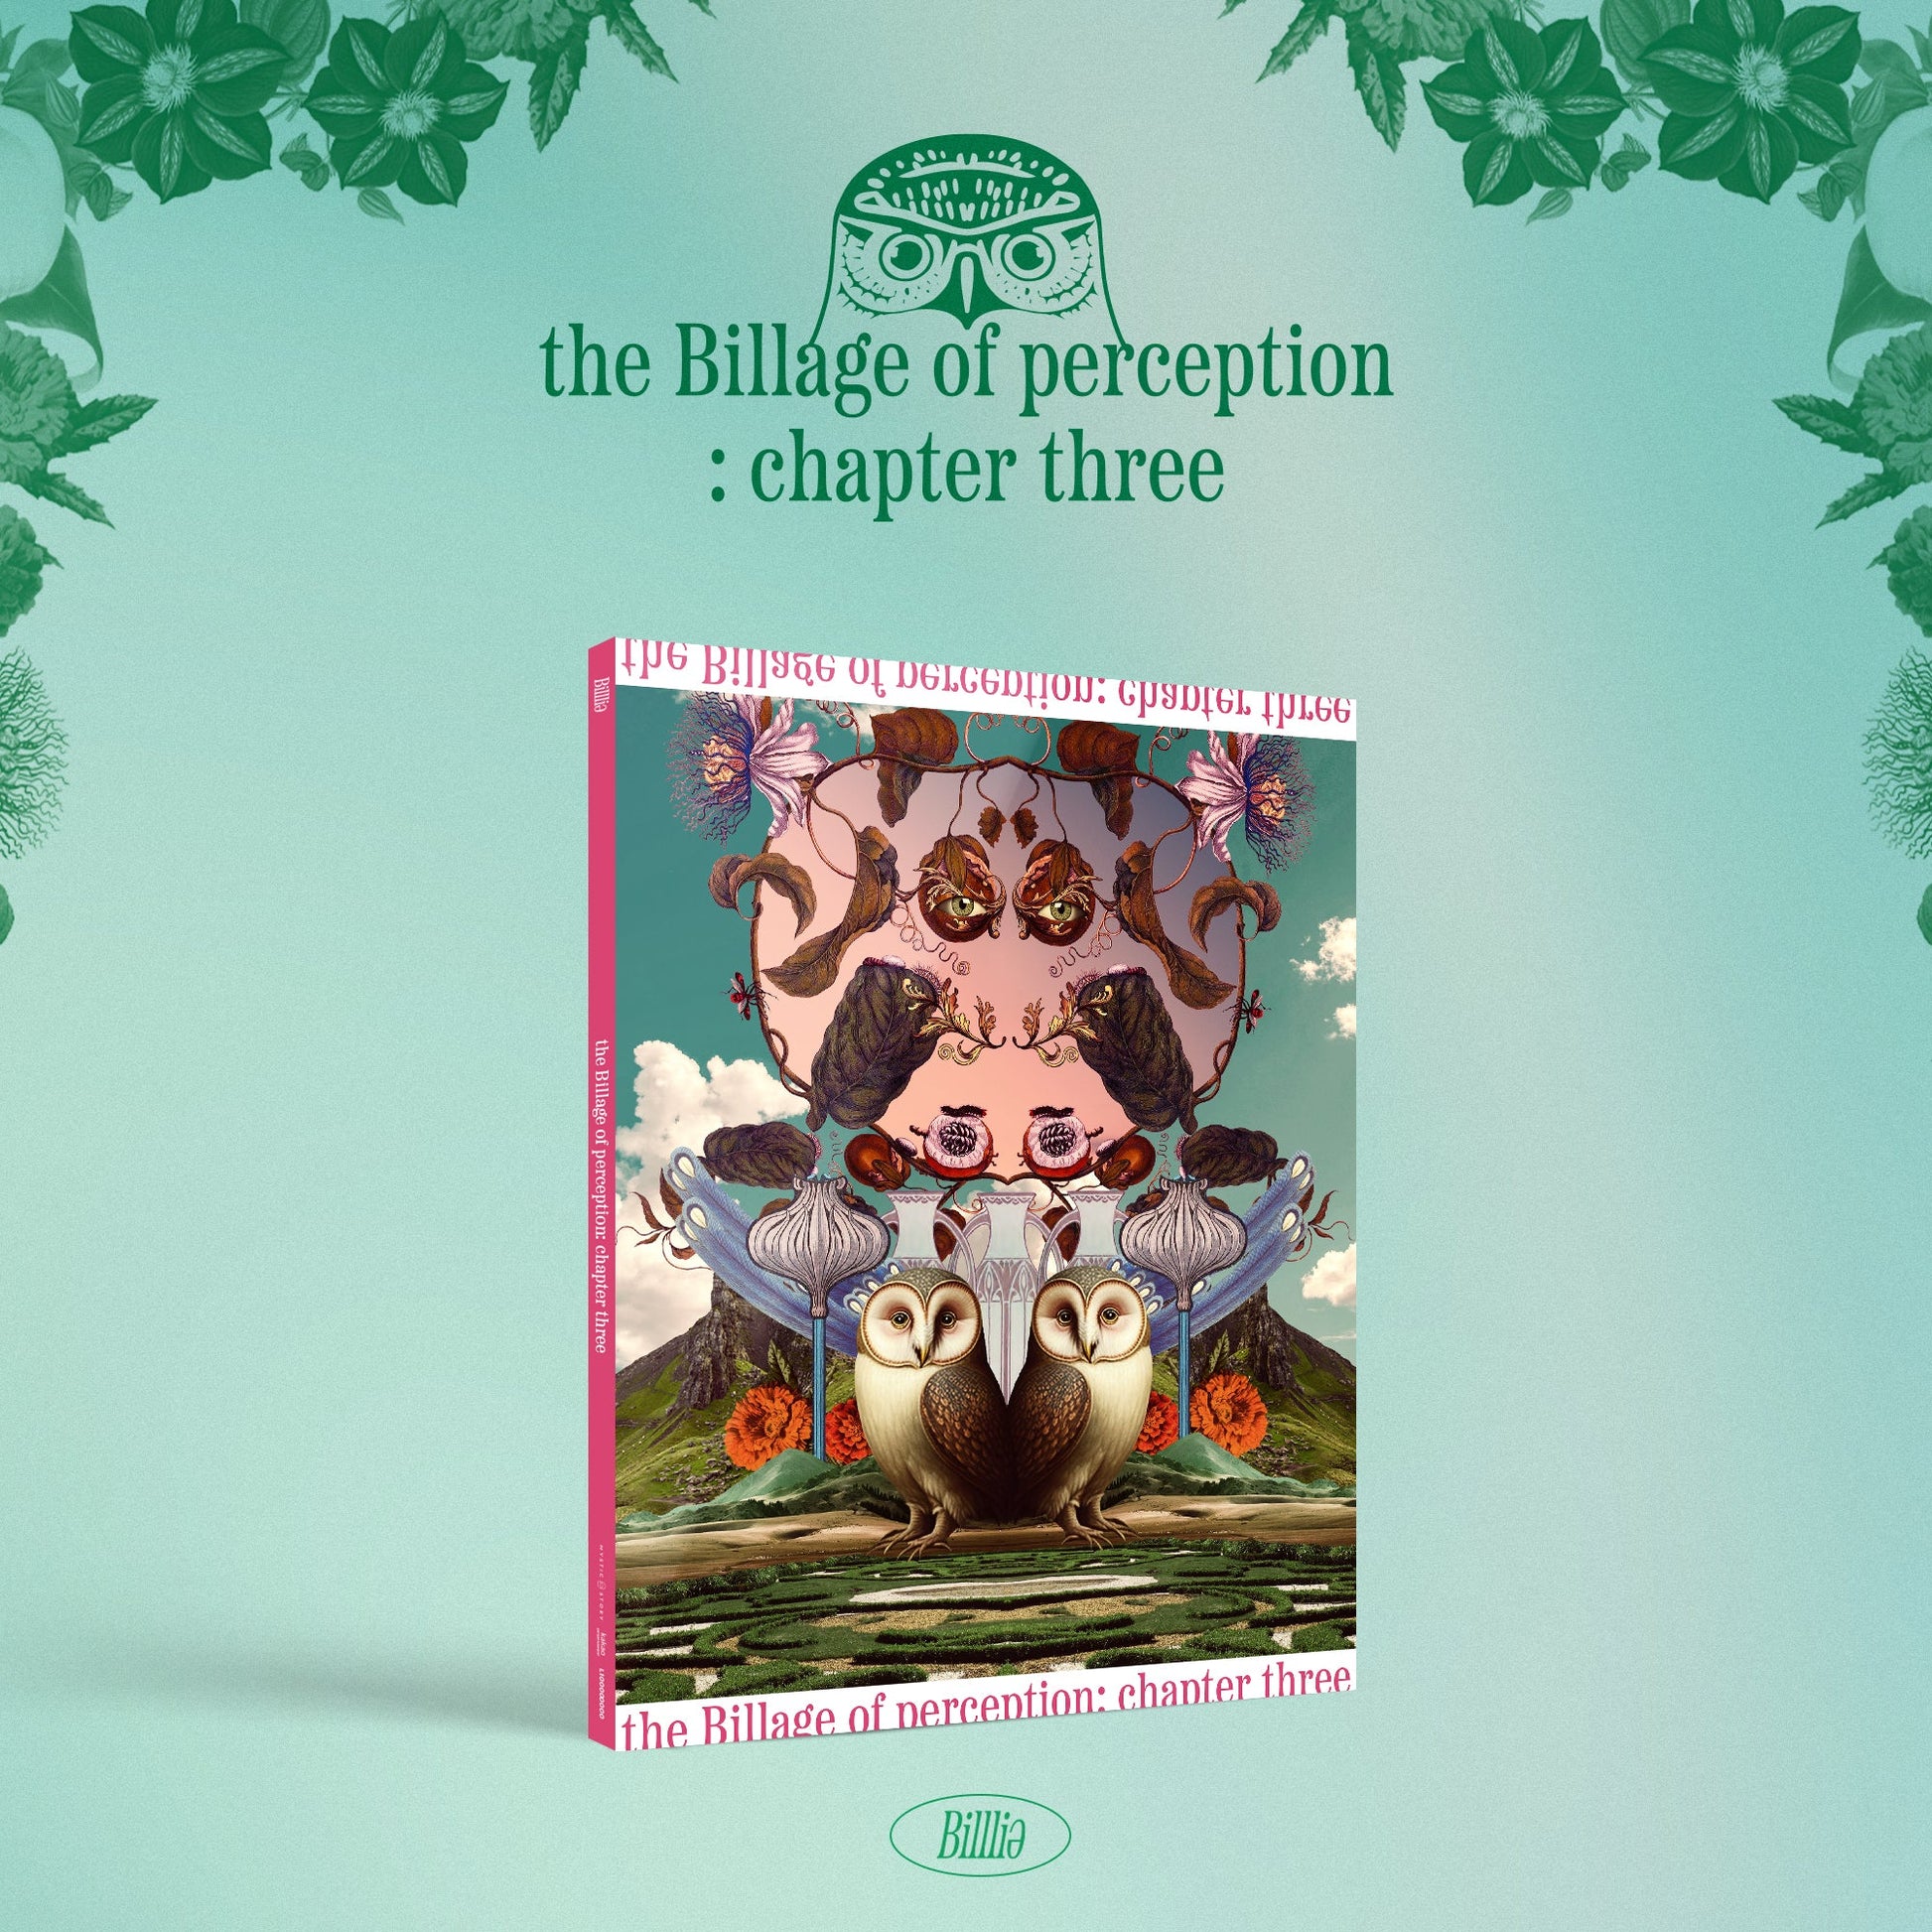 BILLLIE 4TH MINI ALBUM 'THE BILLAGE OF PERCEPTION: CHAPTER THREE' 11:11 AM COLLECTION COVER